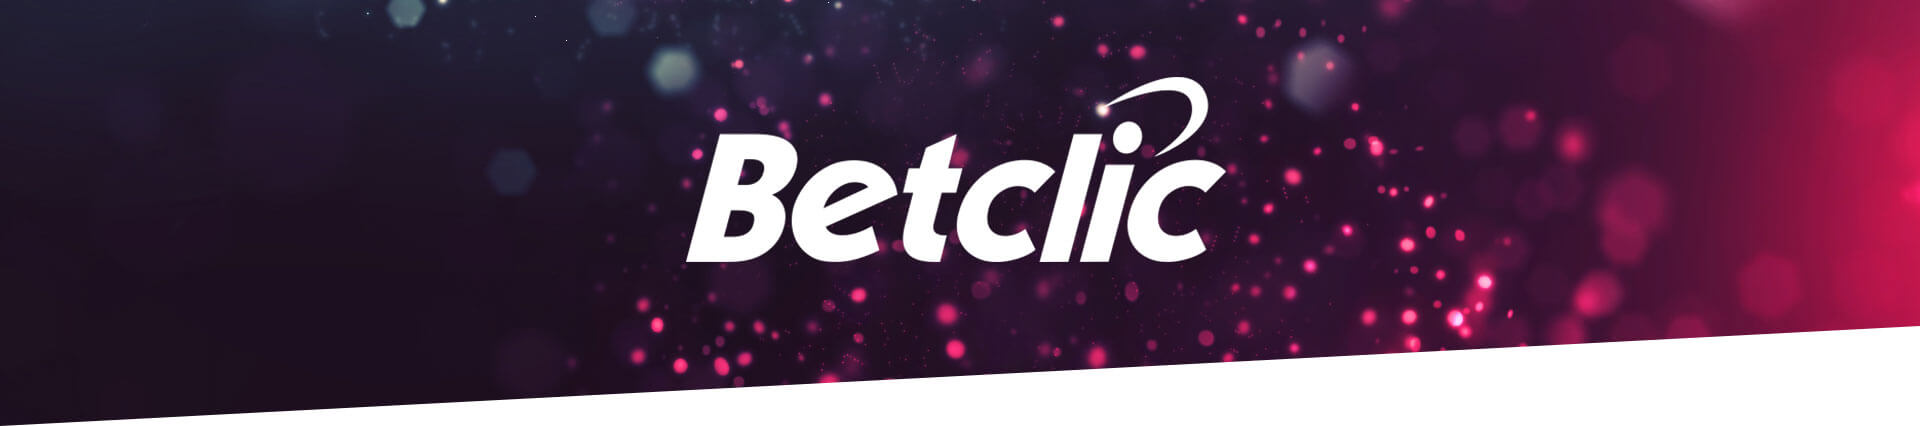 Pragmatic Play Has Joined Forces With Betclic Everest Group